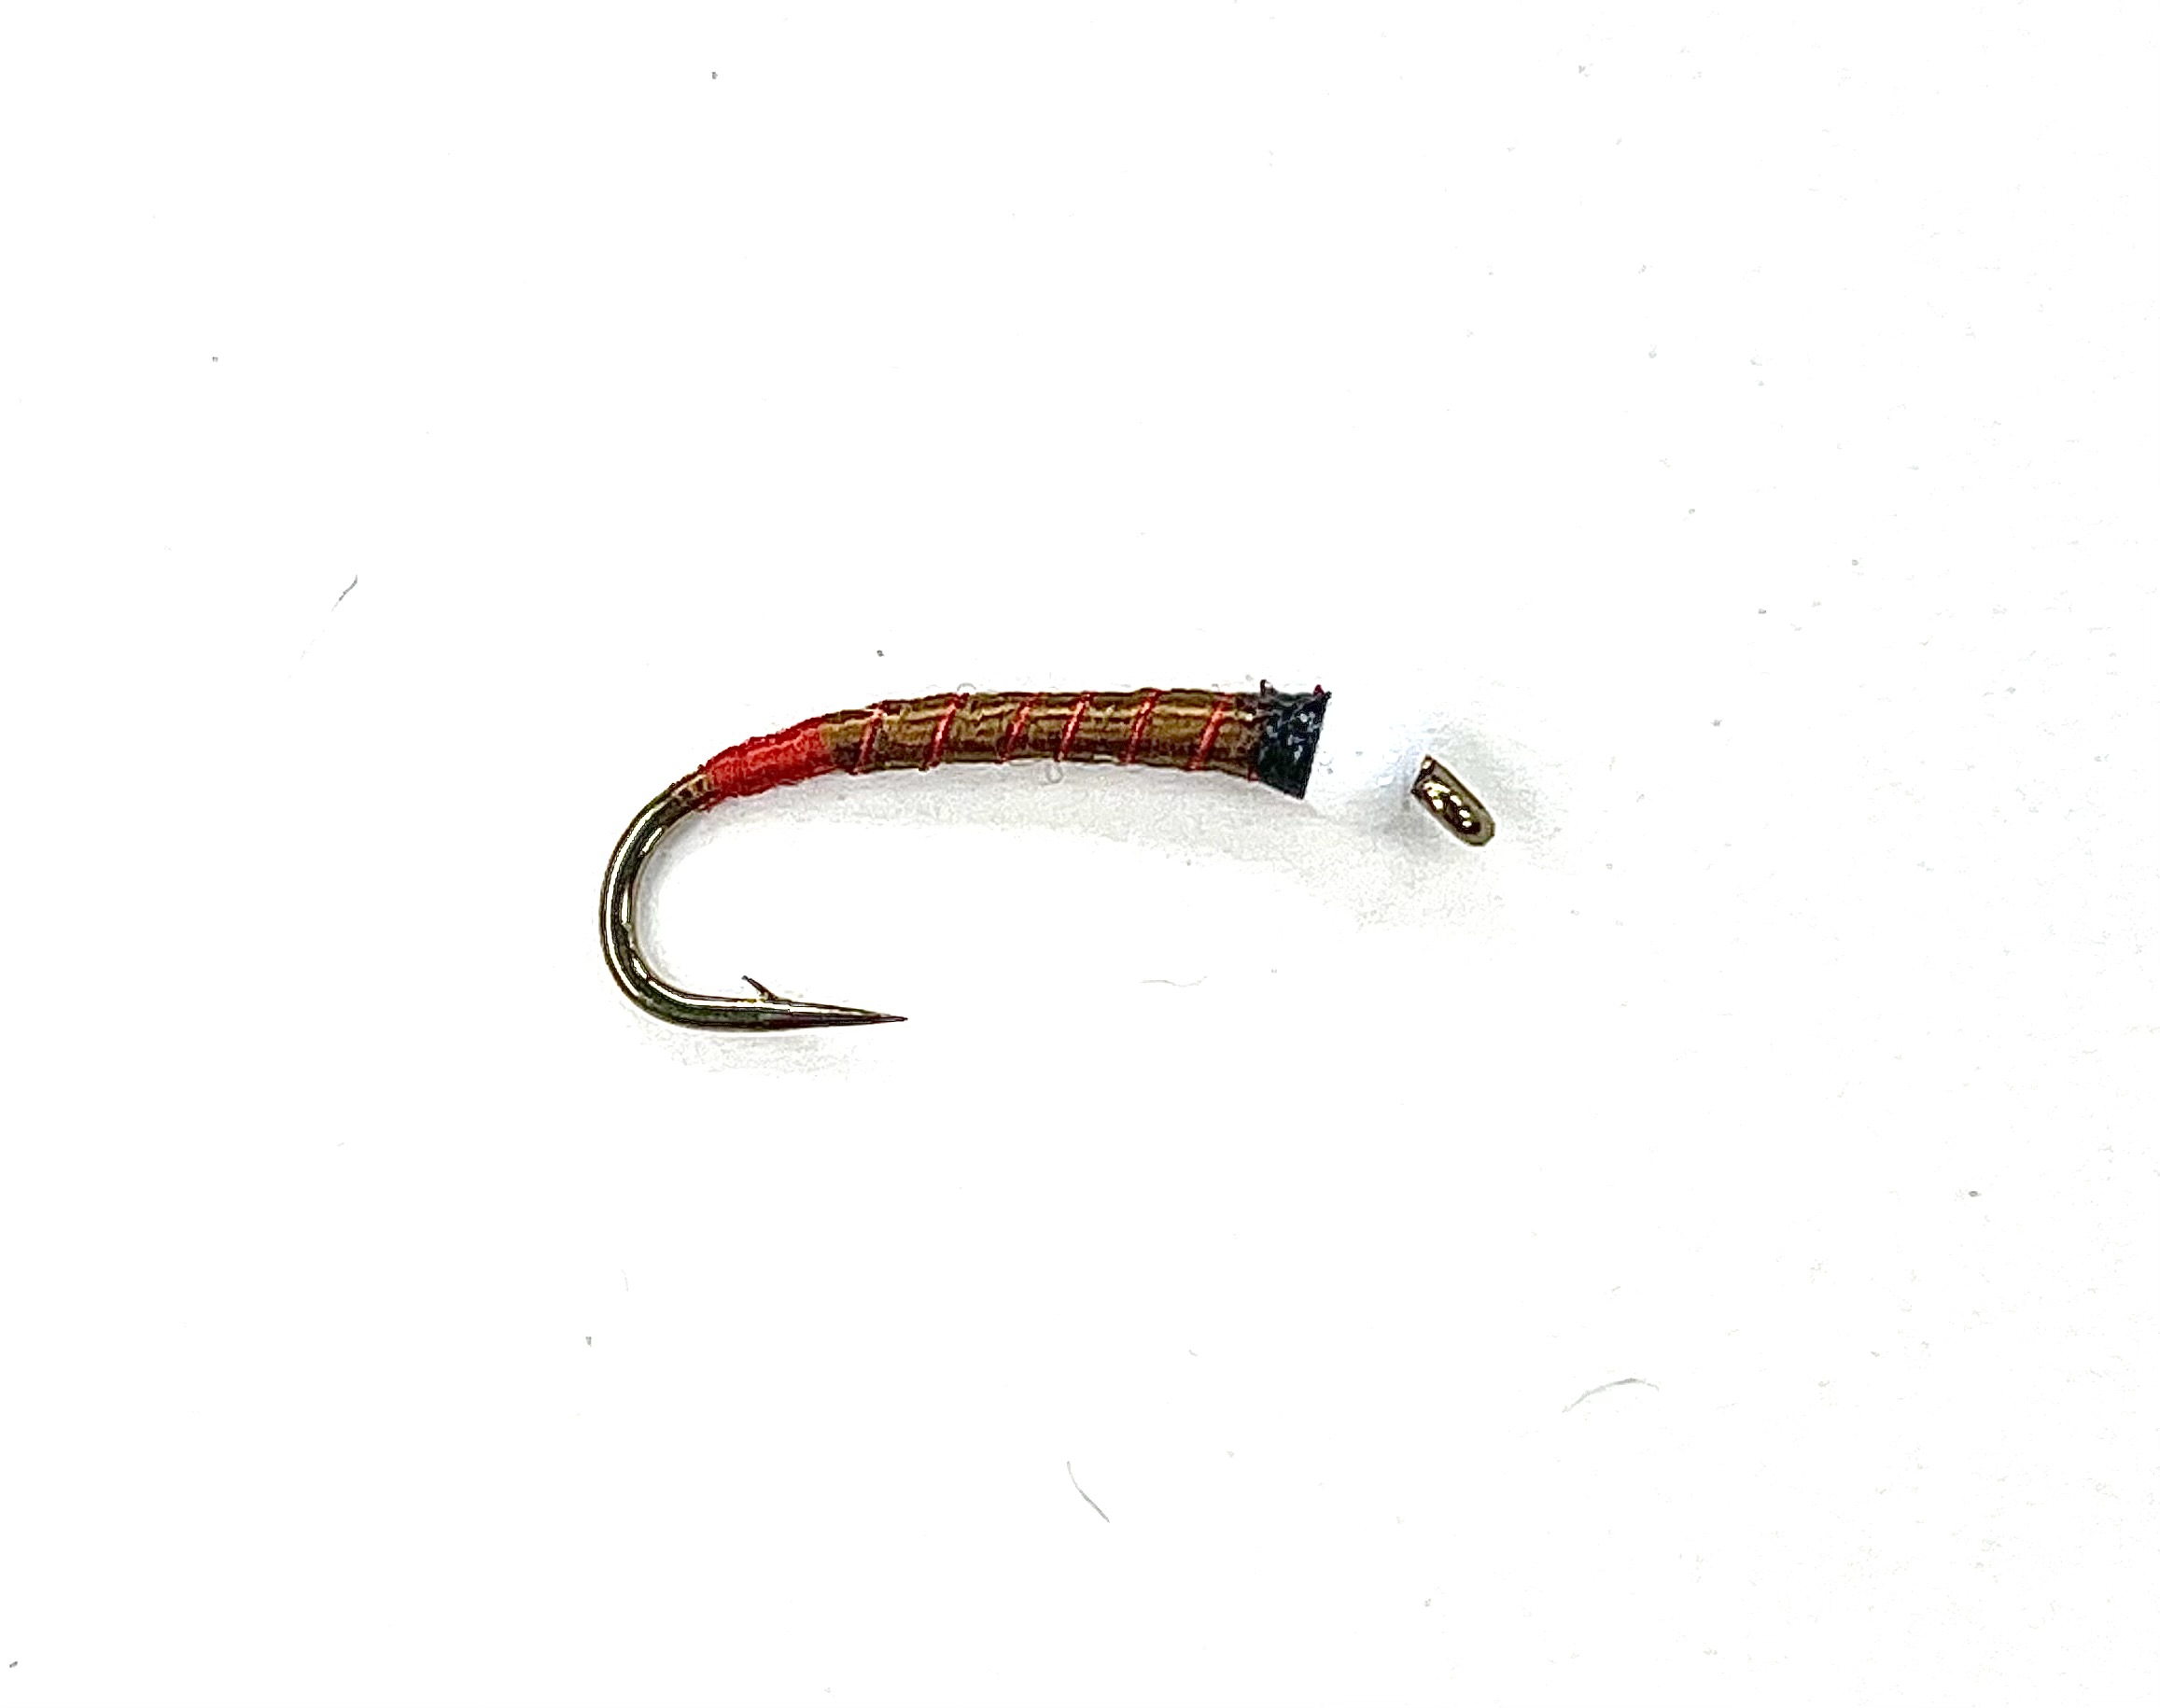 FAD Candy Cone Red Butt Chironomid - Brown/Red Wire - Size 12